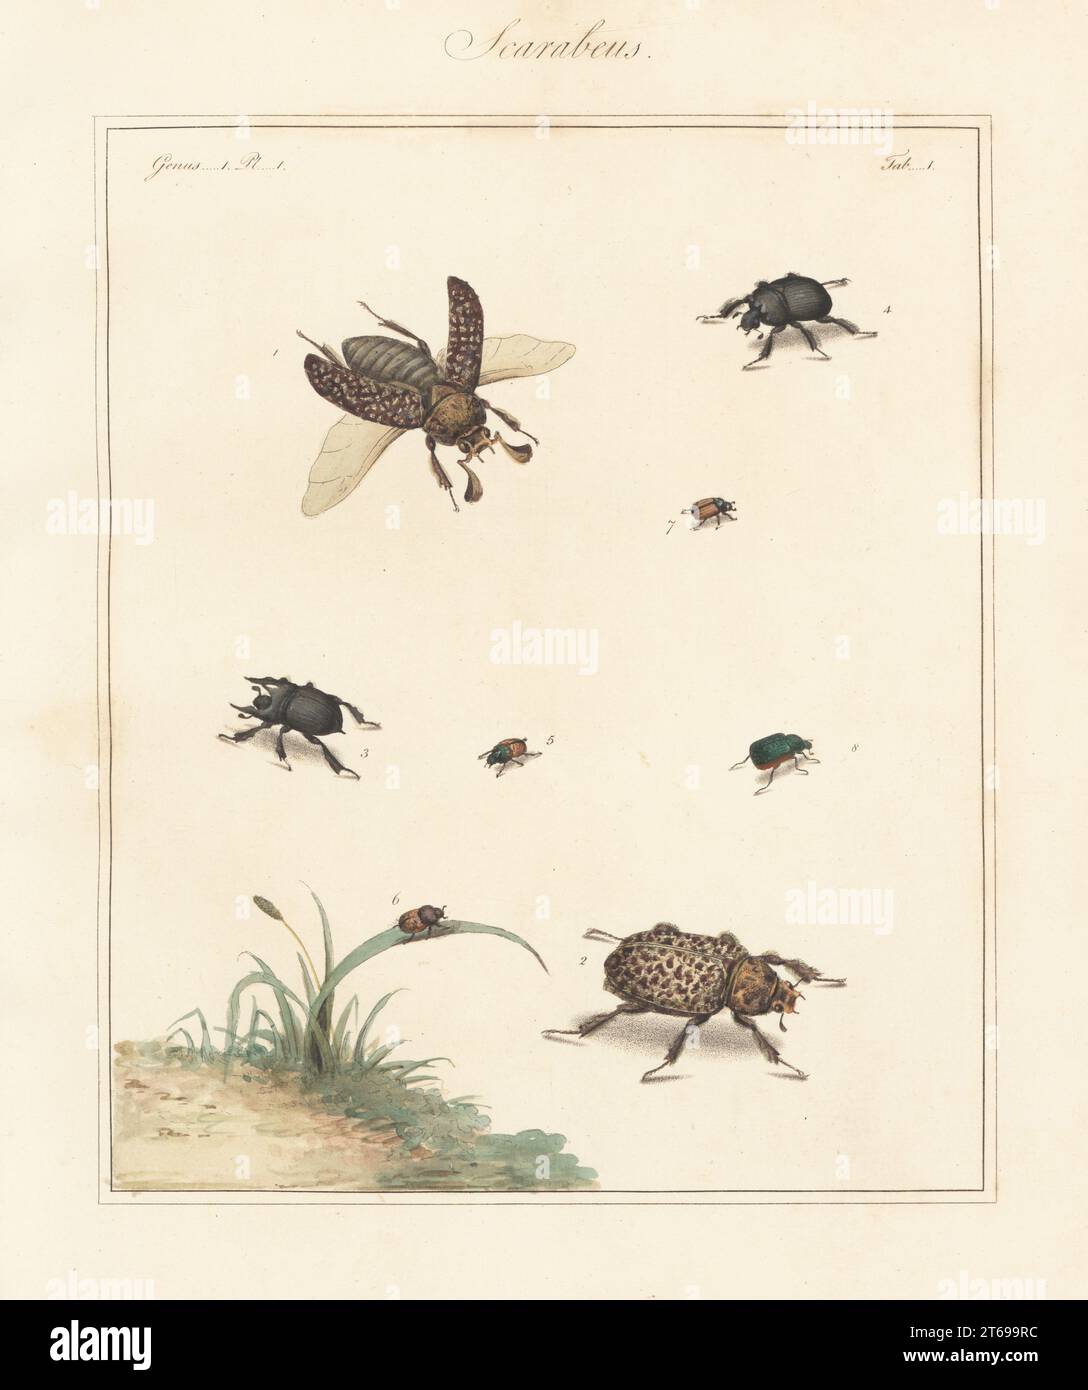 Scarab beetle, Polyphylla (Polyphylla) fullo 1,2, minotaur beetle, Typhaeus typhoeus 3,4, mottled dung beetle, Onthophagus nuchicornis 5,6, Omaloplia ruricola 7 and vine chafer, Anomala vitis 8. Handcoloured copperplate engraving from Thomas Martyns The English Entomologist, Exhibiting all the Coleopterous Insects found in England, Academy for Illustrating and Painting Natural History, London, 1792. Stock Photo